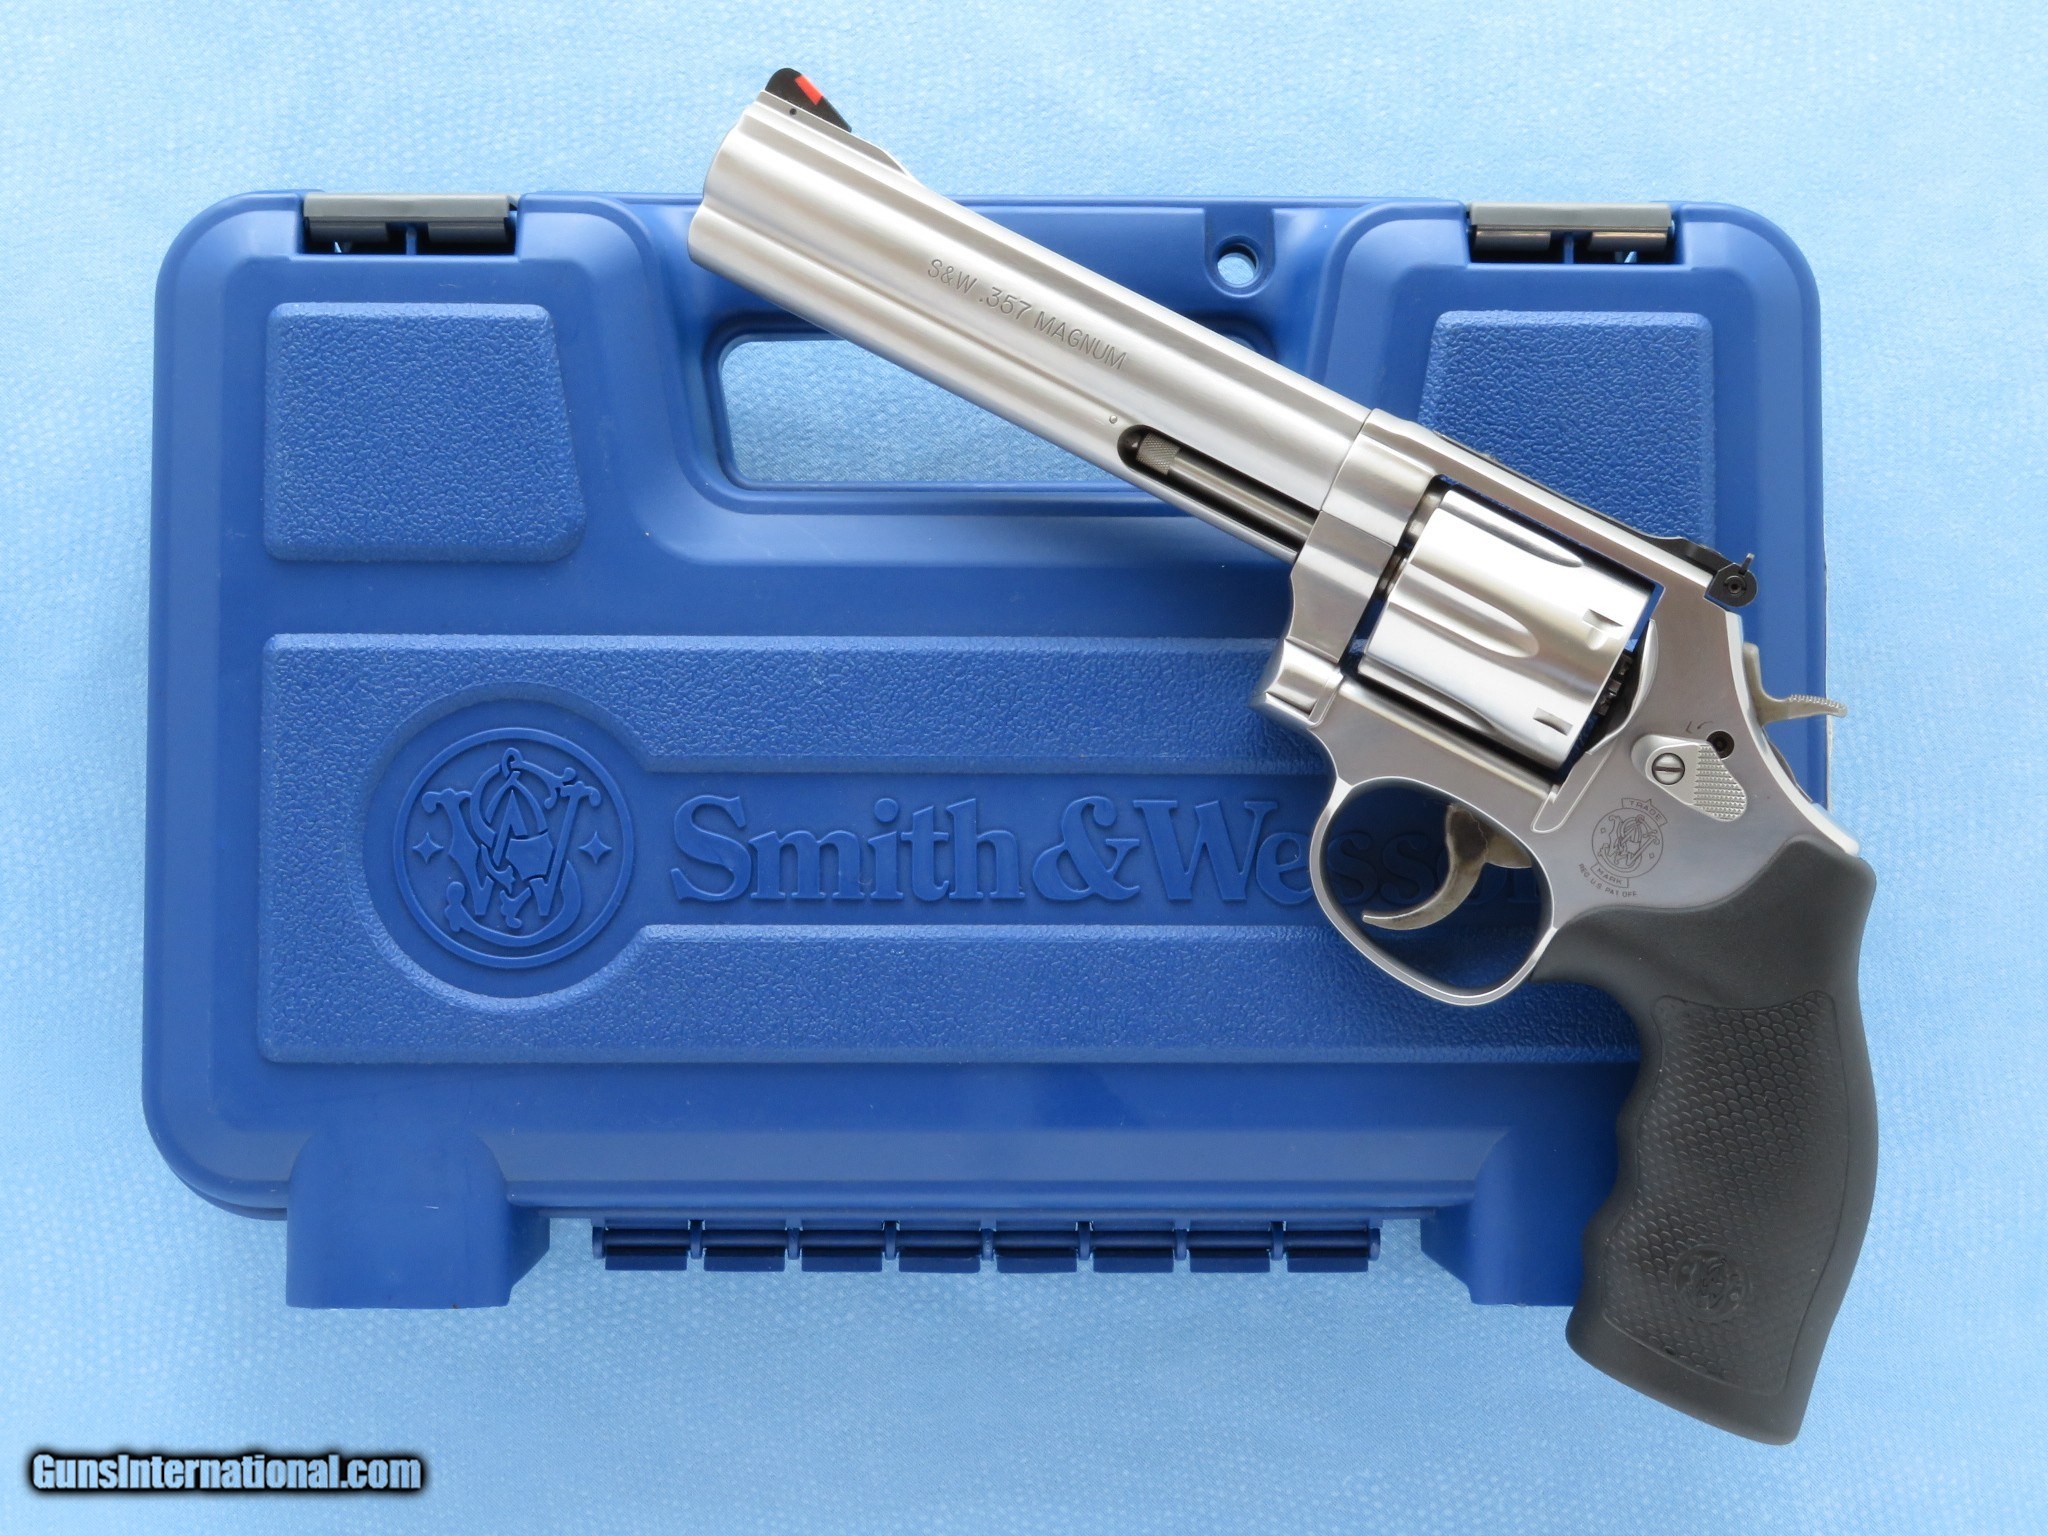 Smith And Wesson Model 686 Distinguished Combat Magnum Cal 357 Magnum 6 Inch Barrel Sold